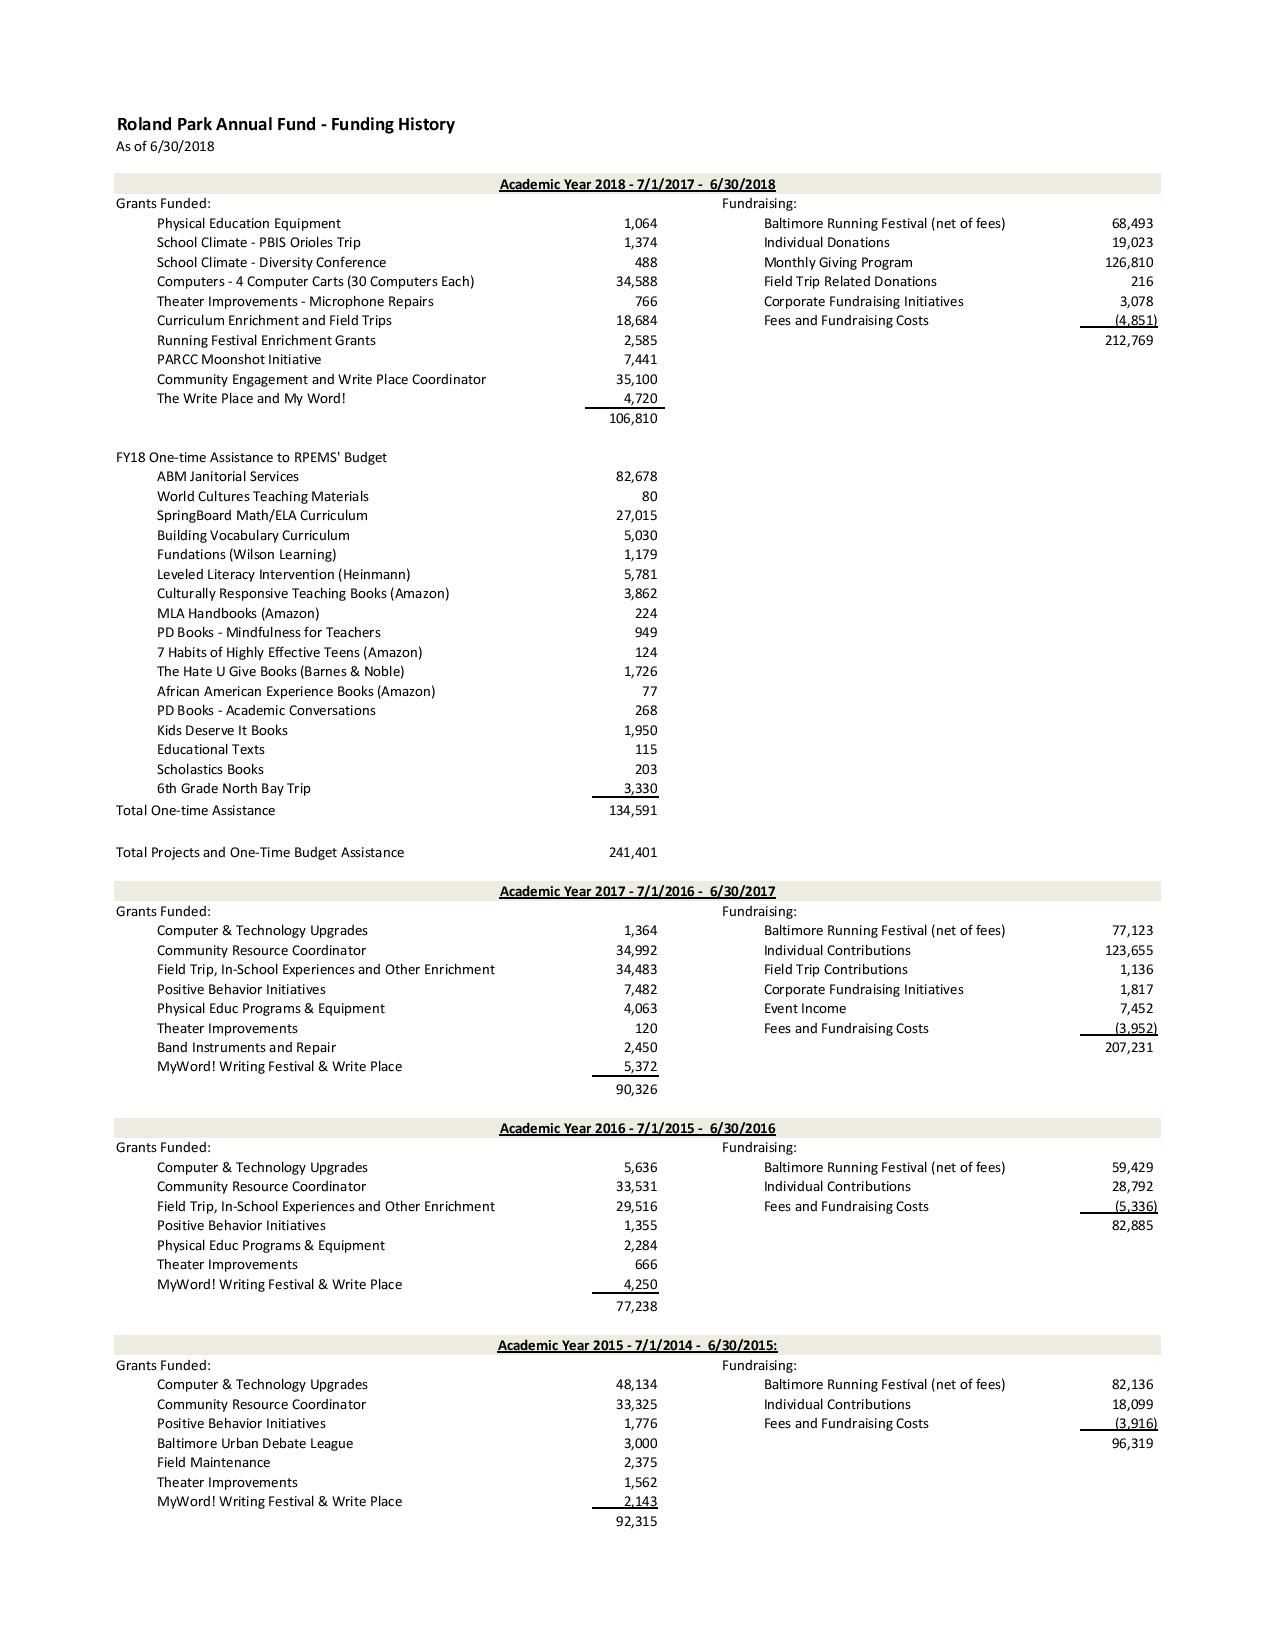 1Roland Park Annual Fund Grant History as of 06.30.18.xlsx-page-001.jpg